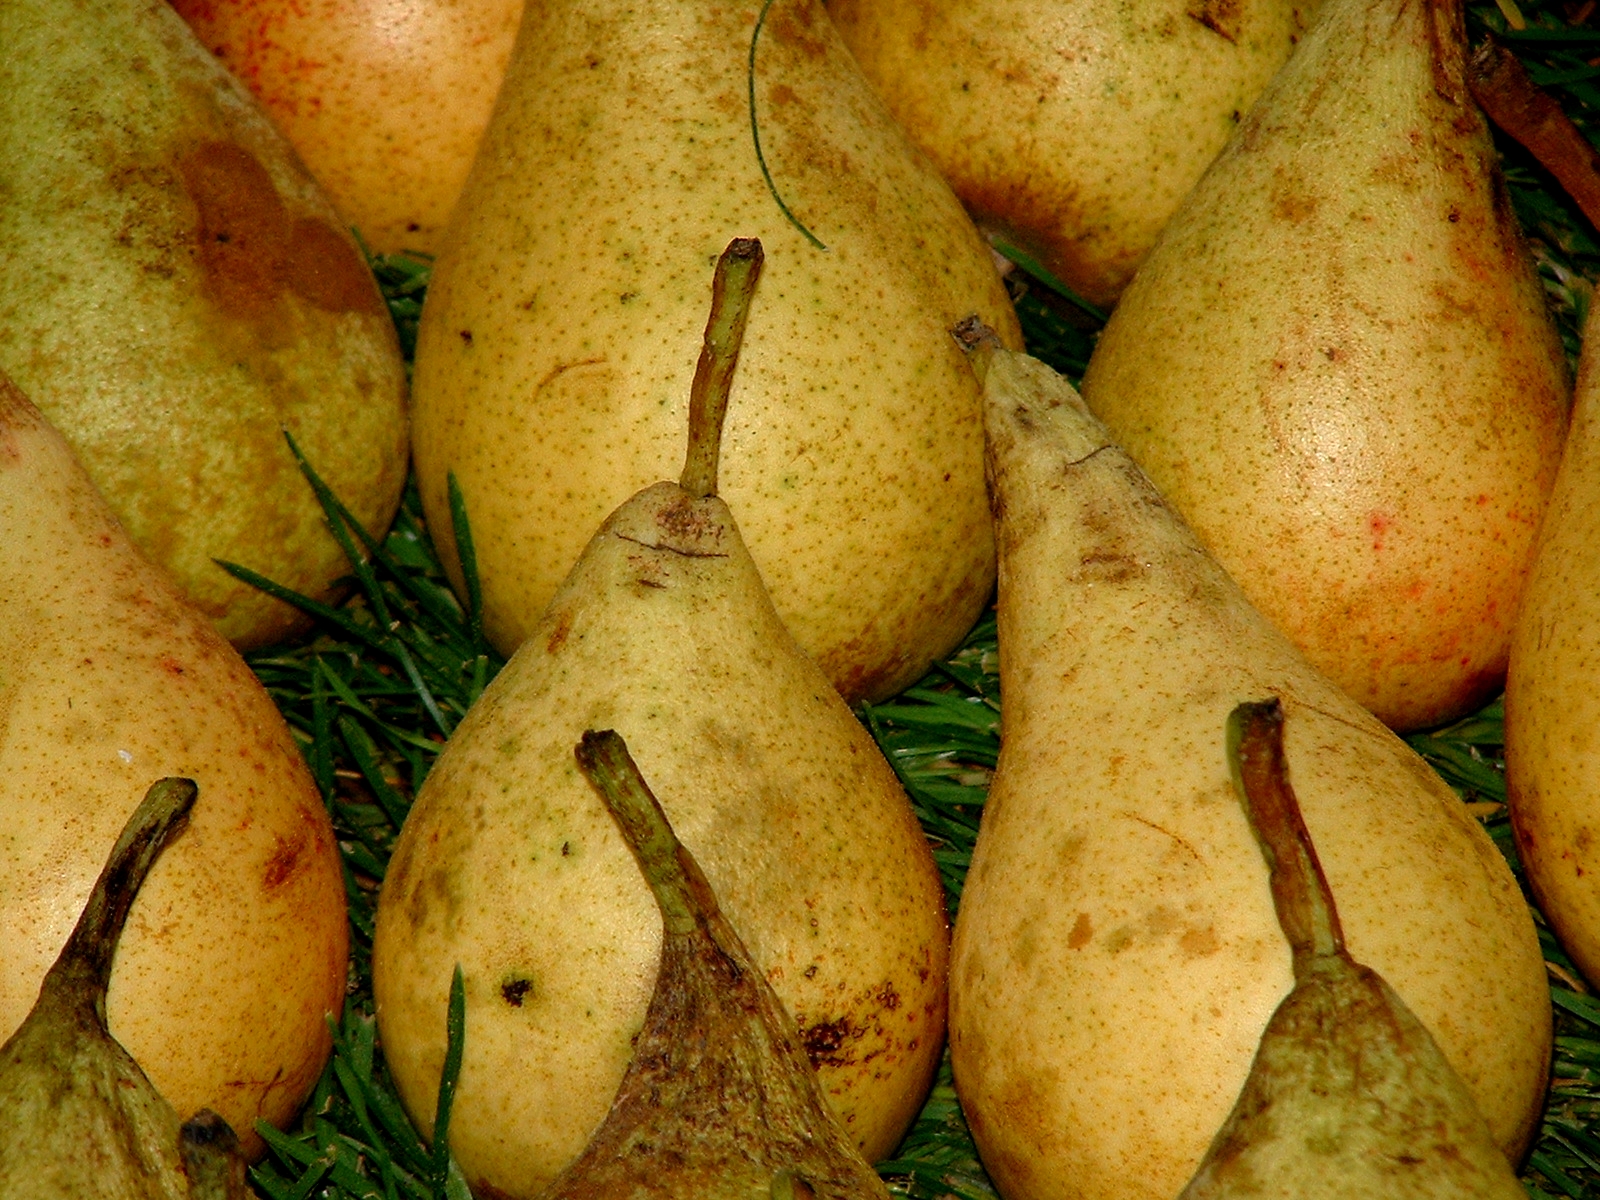 several pears and a pear split in pieces together